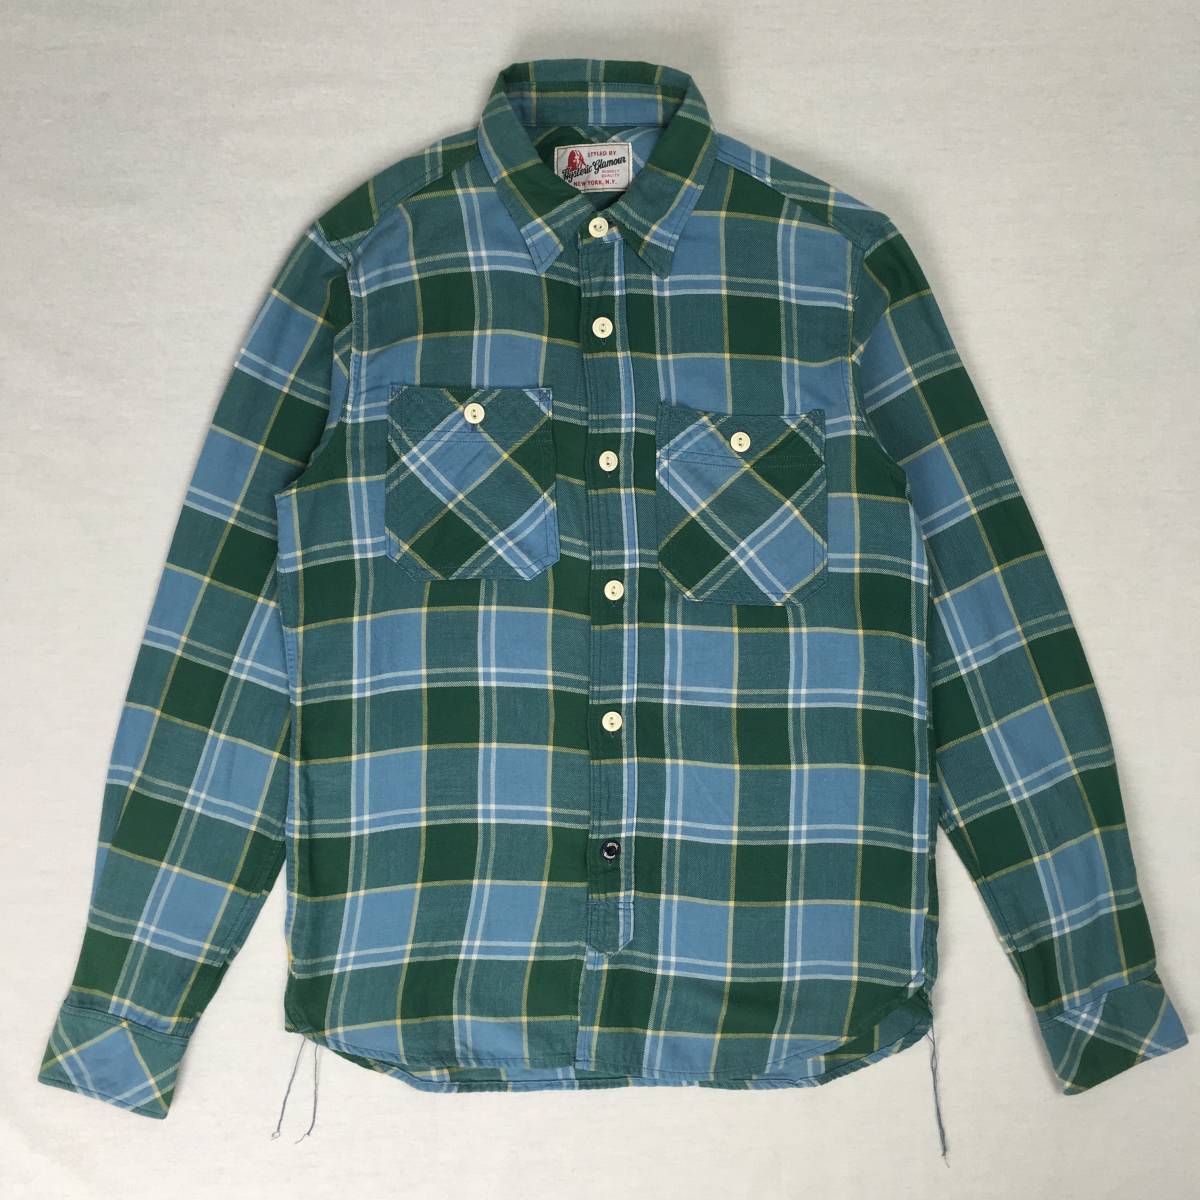 HYSTERIC GLAMOUR Hysteric Glamour check pattern shirt made in Japan S size long sleeve empty . finishing 0243AH02